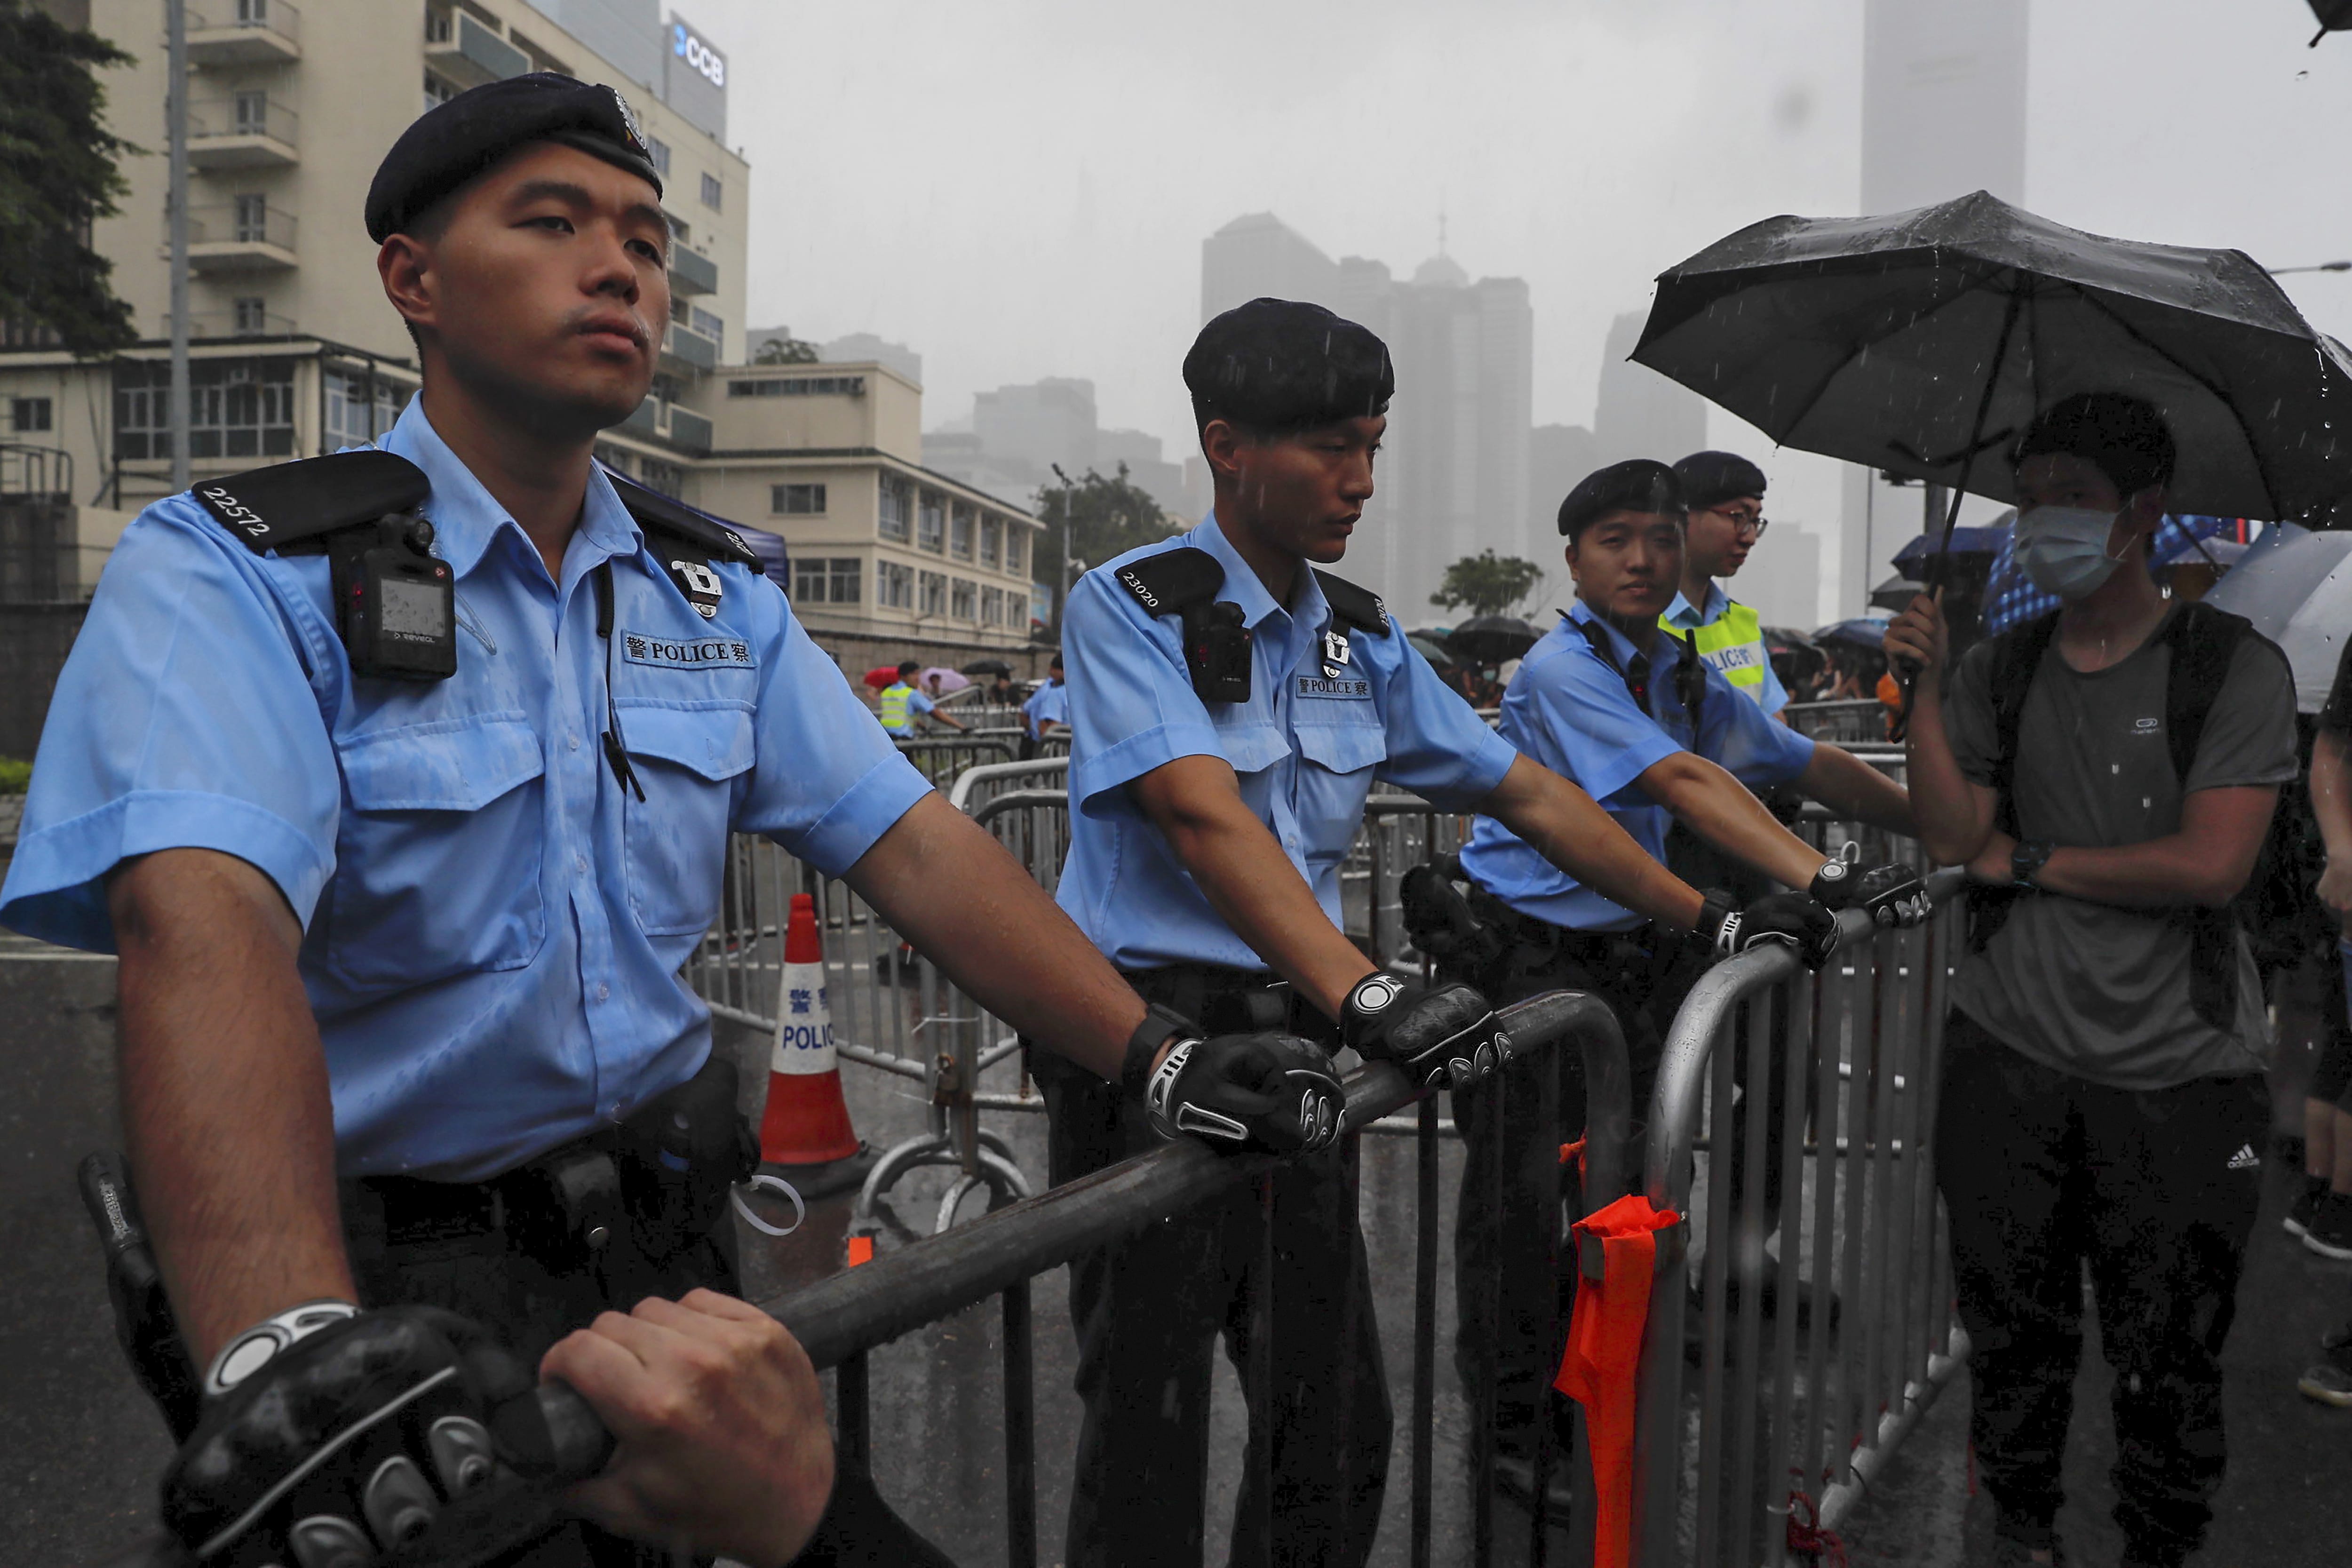 Policemen stand guard in the rain as protesters gather near the Legislative Council continuing protest against the unpopular extradition bill in Hong Kong, Monday, June 17, 2019. A member of Hong Kong's Executive Council says the city's leader plans to apologize again over her handling of a highly unpopular extradition bill.